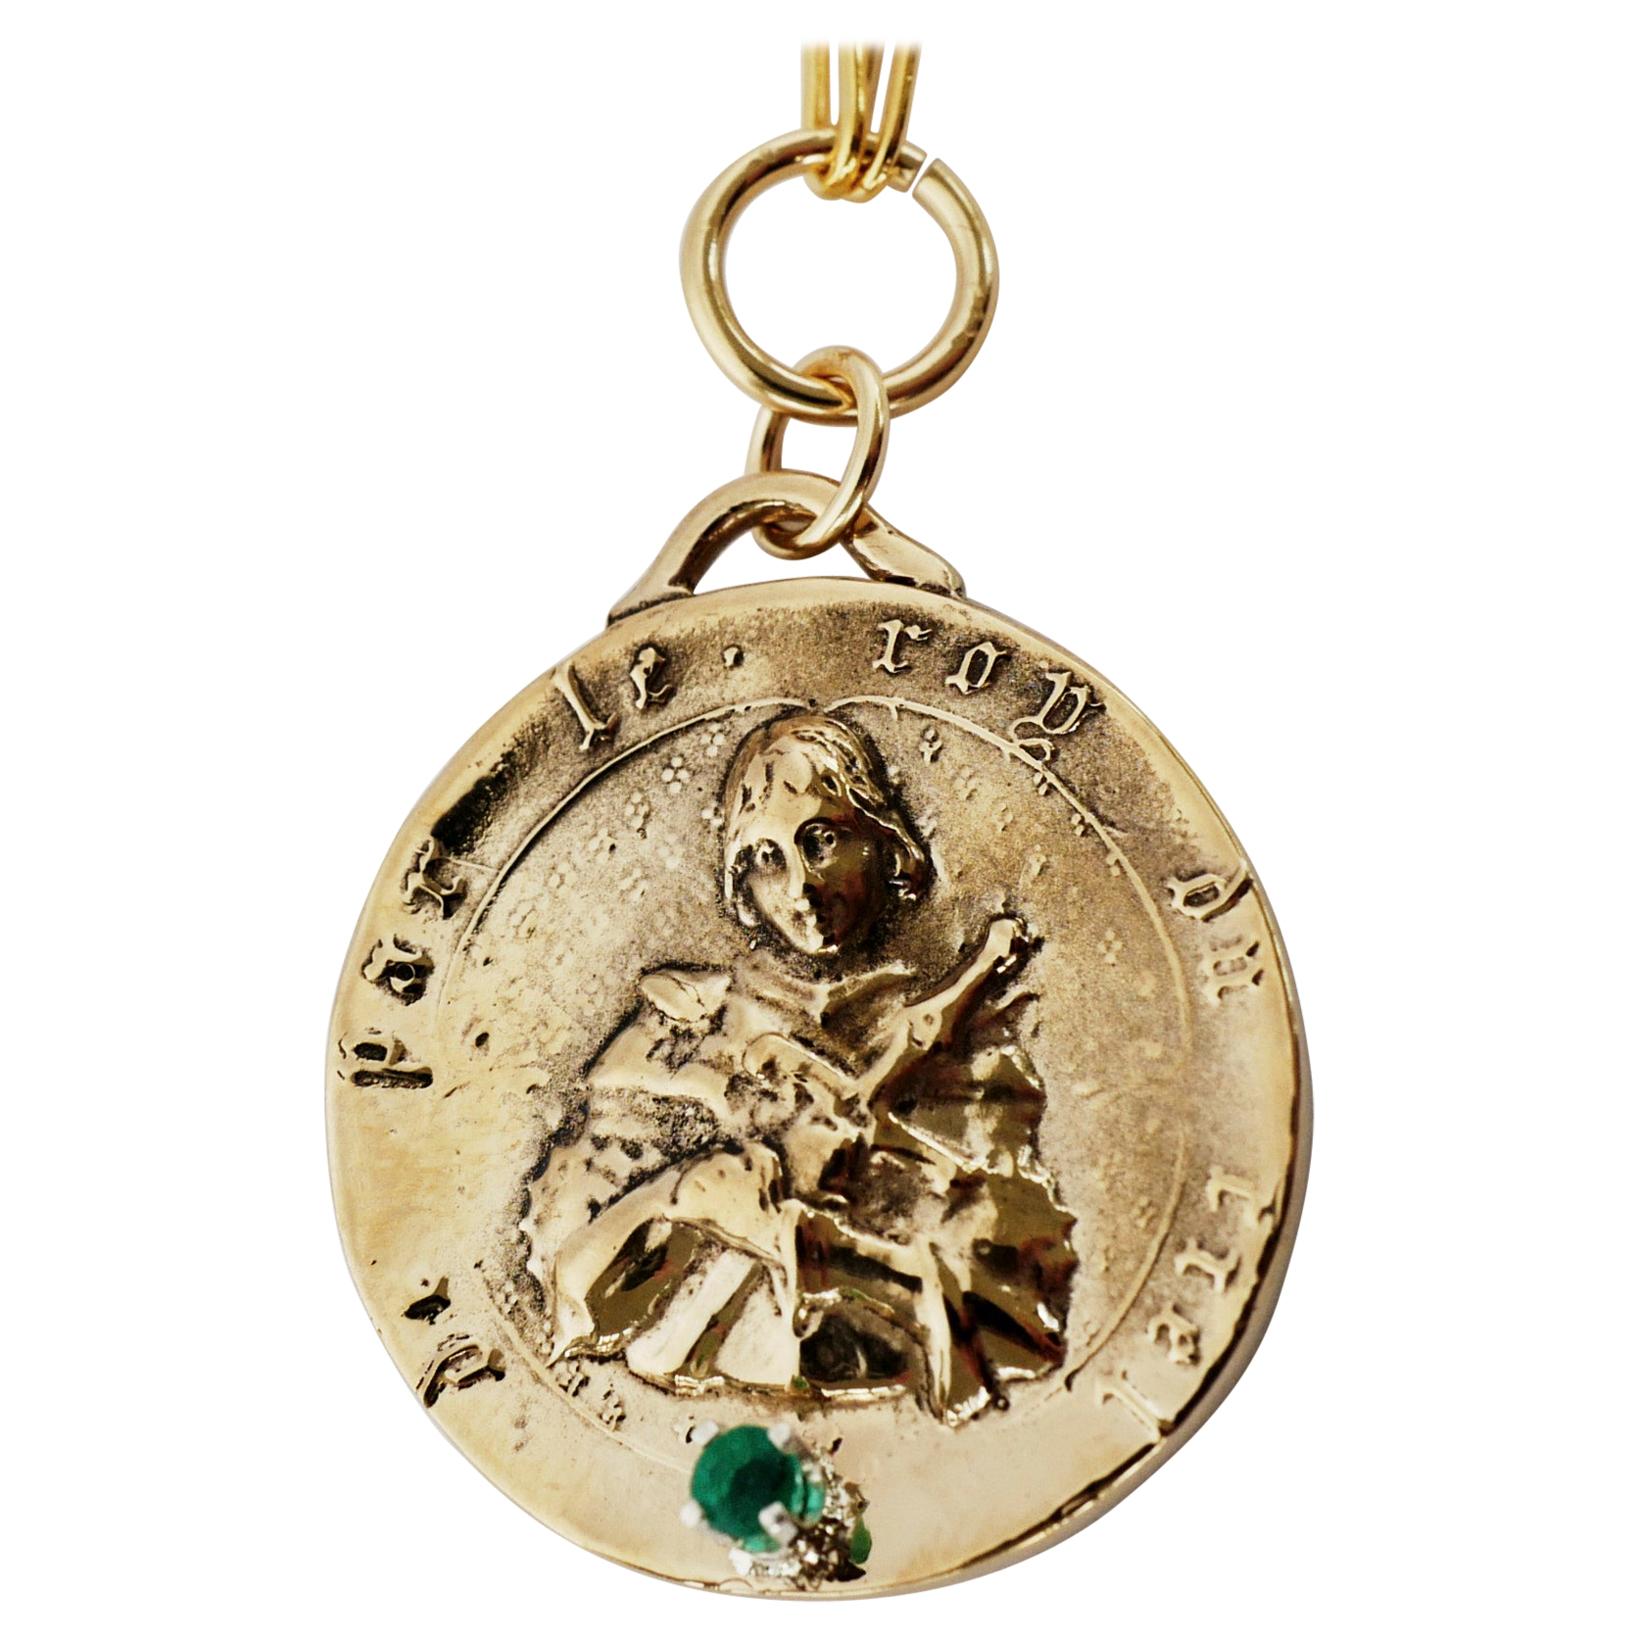 Emerald Set on a Medal Pendant of Joan of Arc, the chunky chain necklace is gold filled J Dauphin

Exclusive piece with Joan of Arc Medal Round Coin pendant in Bronze with an Emerald and a gold filled Chain. Necklace is 24